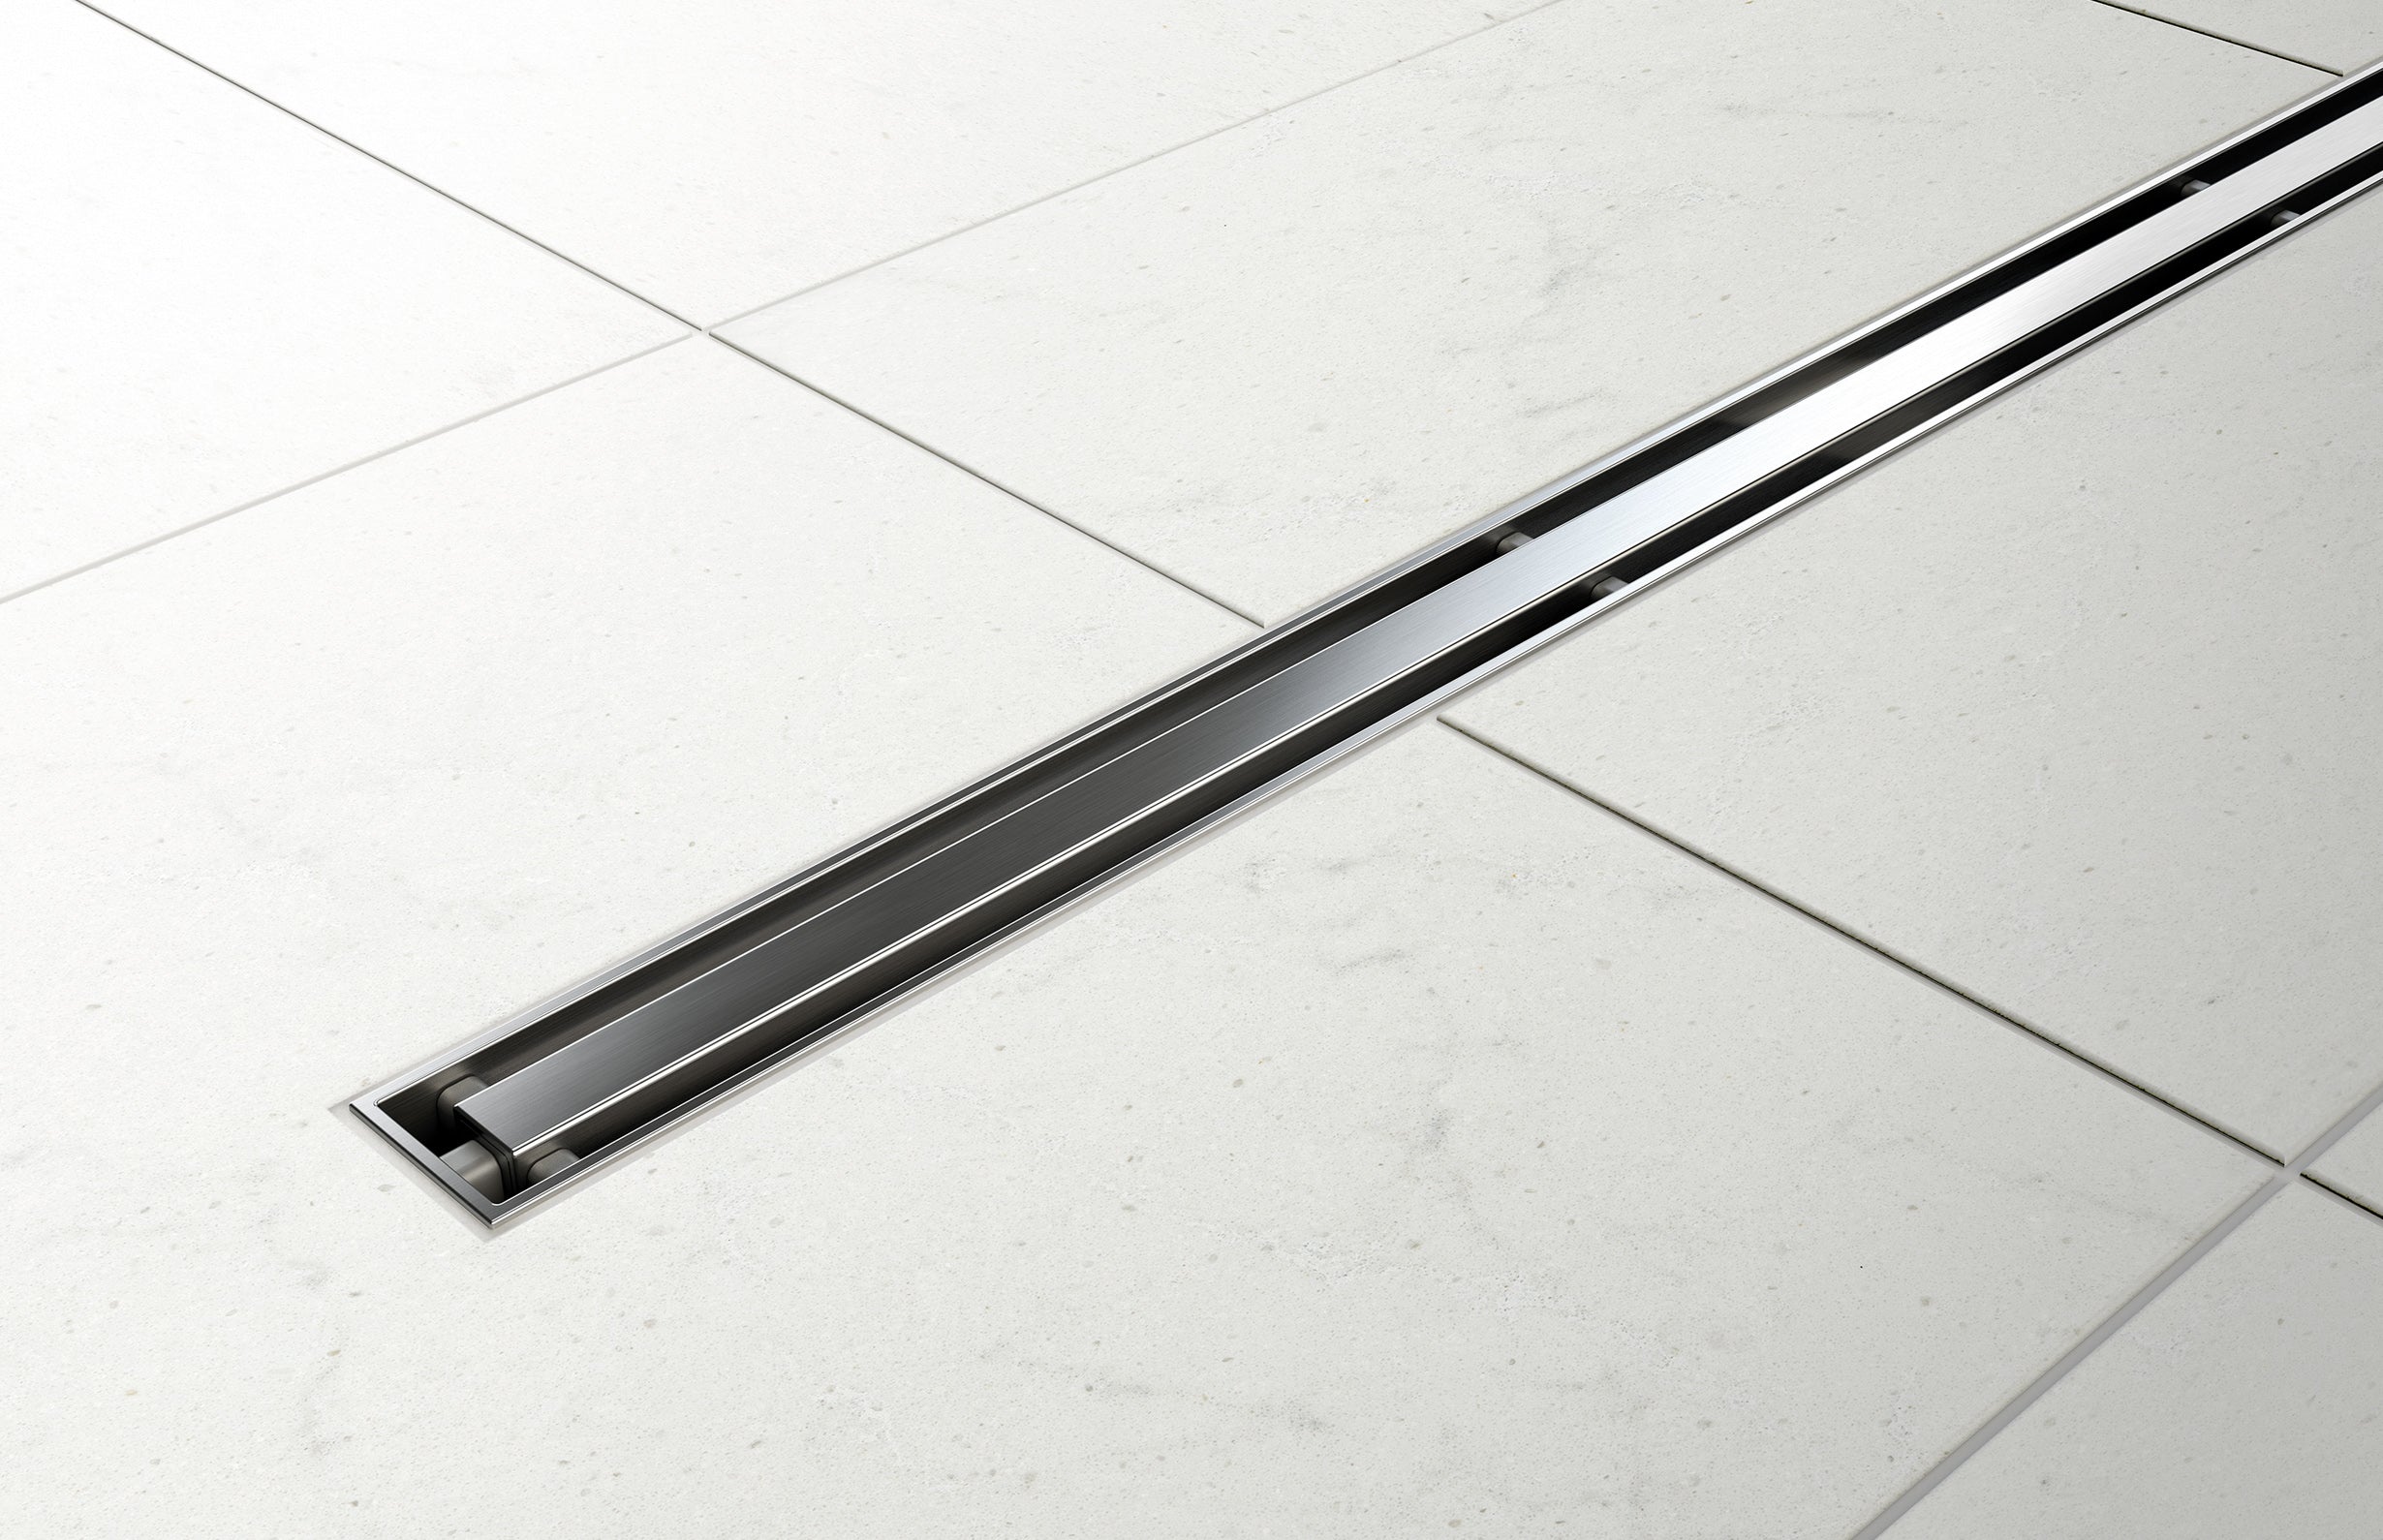 PHOENIX FLAT SLIMLINE 65MM CHANNEL DRAIN 30MM OUTLET STAINLESS STEEL 600MM, 750MM AND 900MM